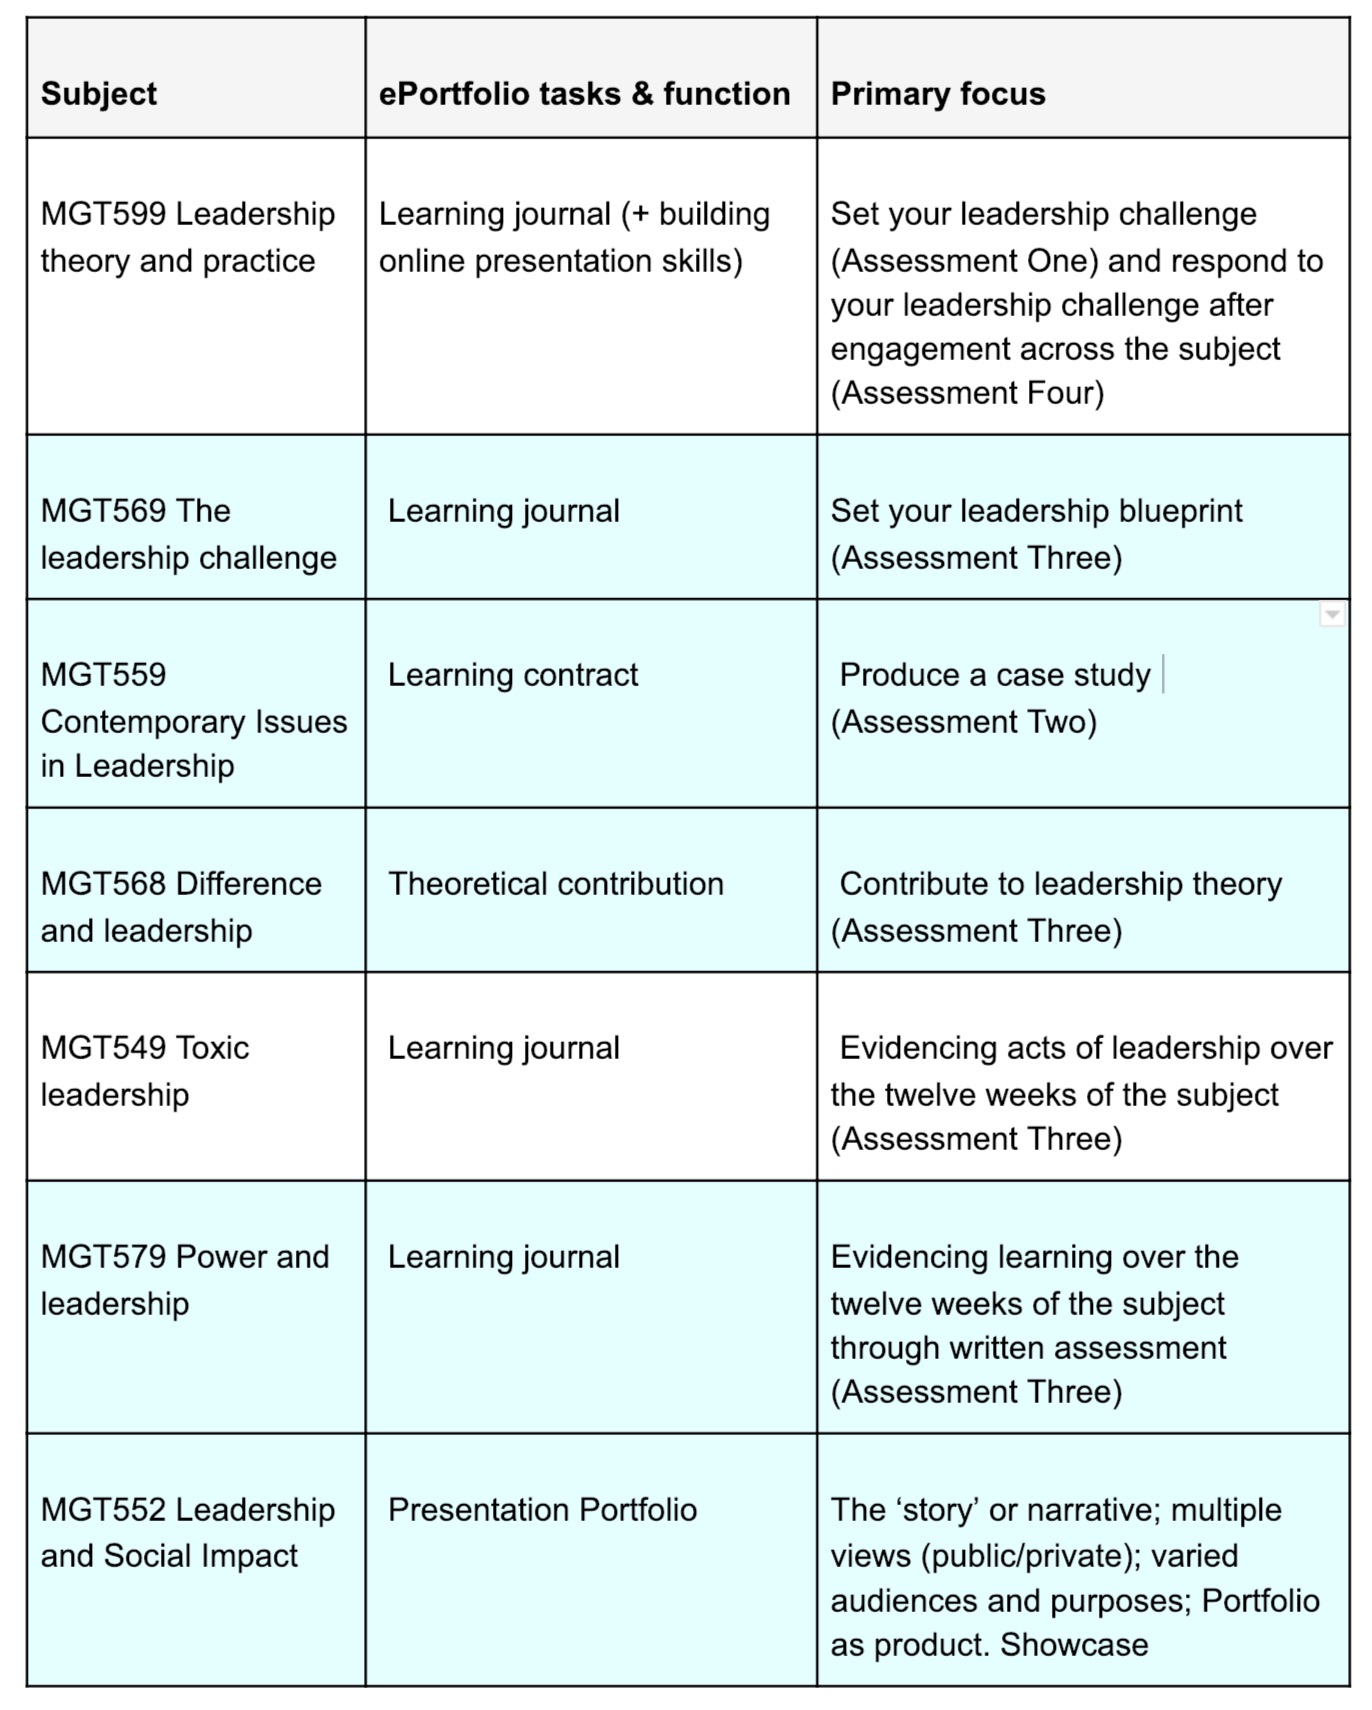 Table of subject, tasks and primary focus areas 